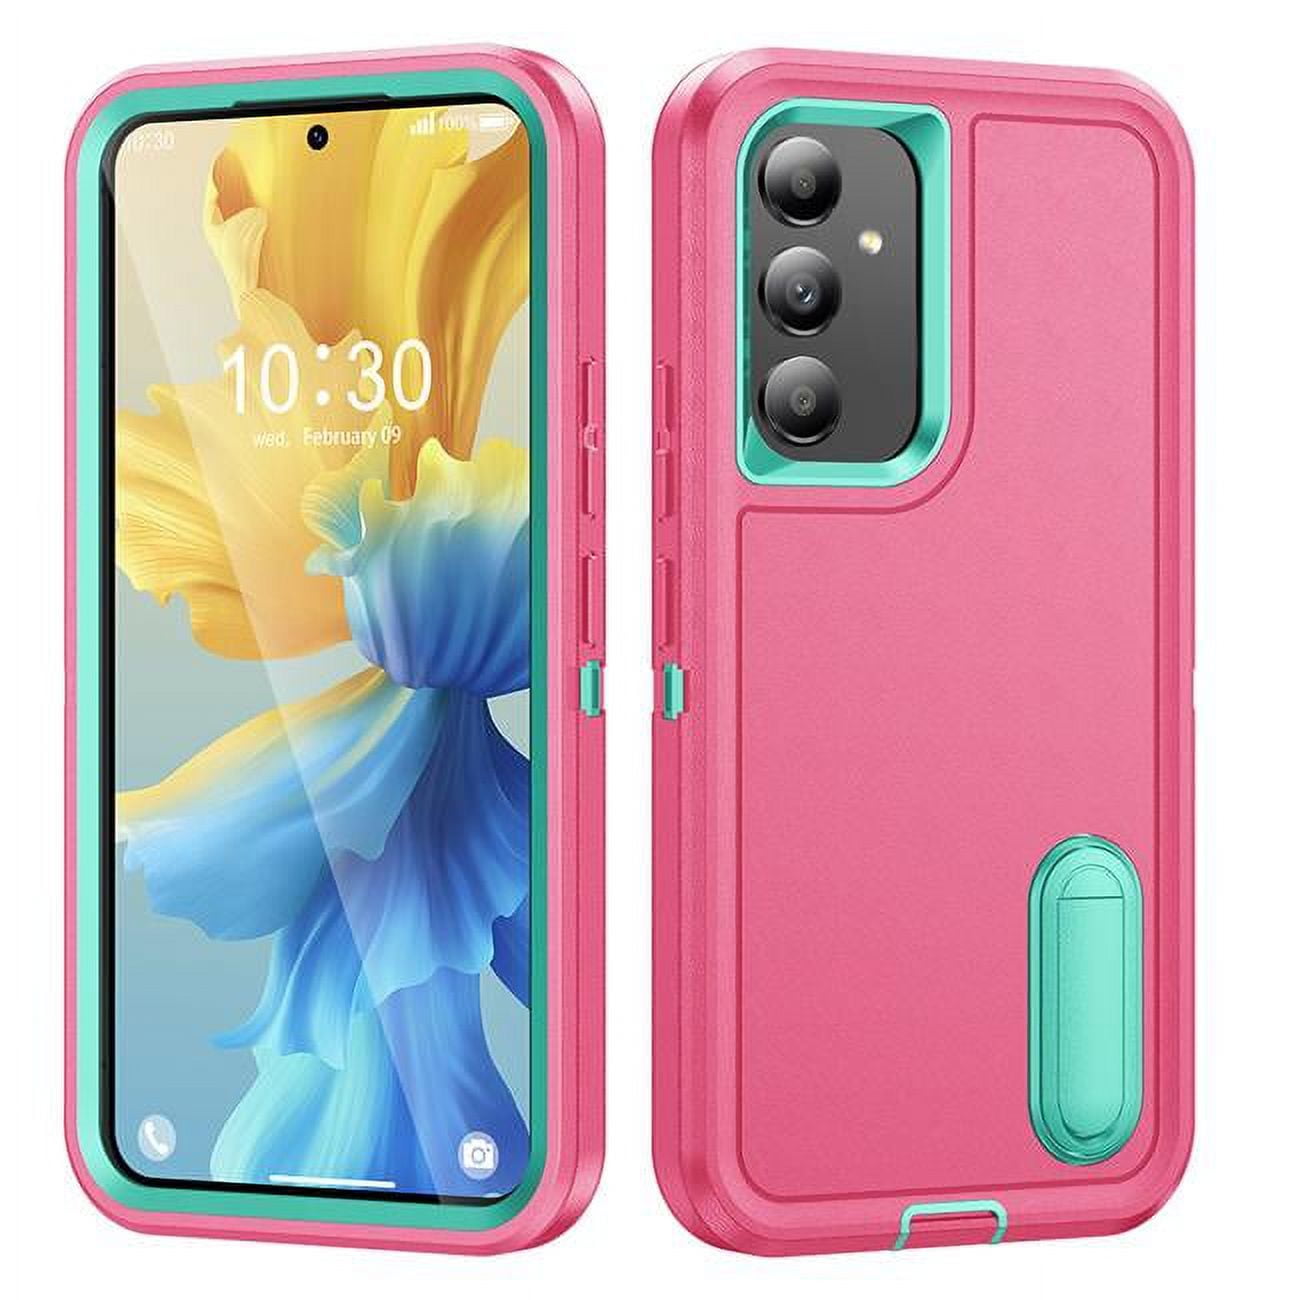 Picture of Dream Wireless TCASAMA545G-DYN-PKTL Dynamic Pro Plus Hybrid Ultra Protective Case with Kickstand for Samsung Galaxy A54 5G - Pink & Teal